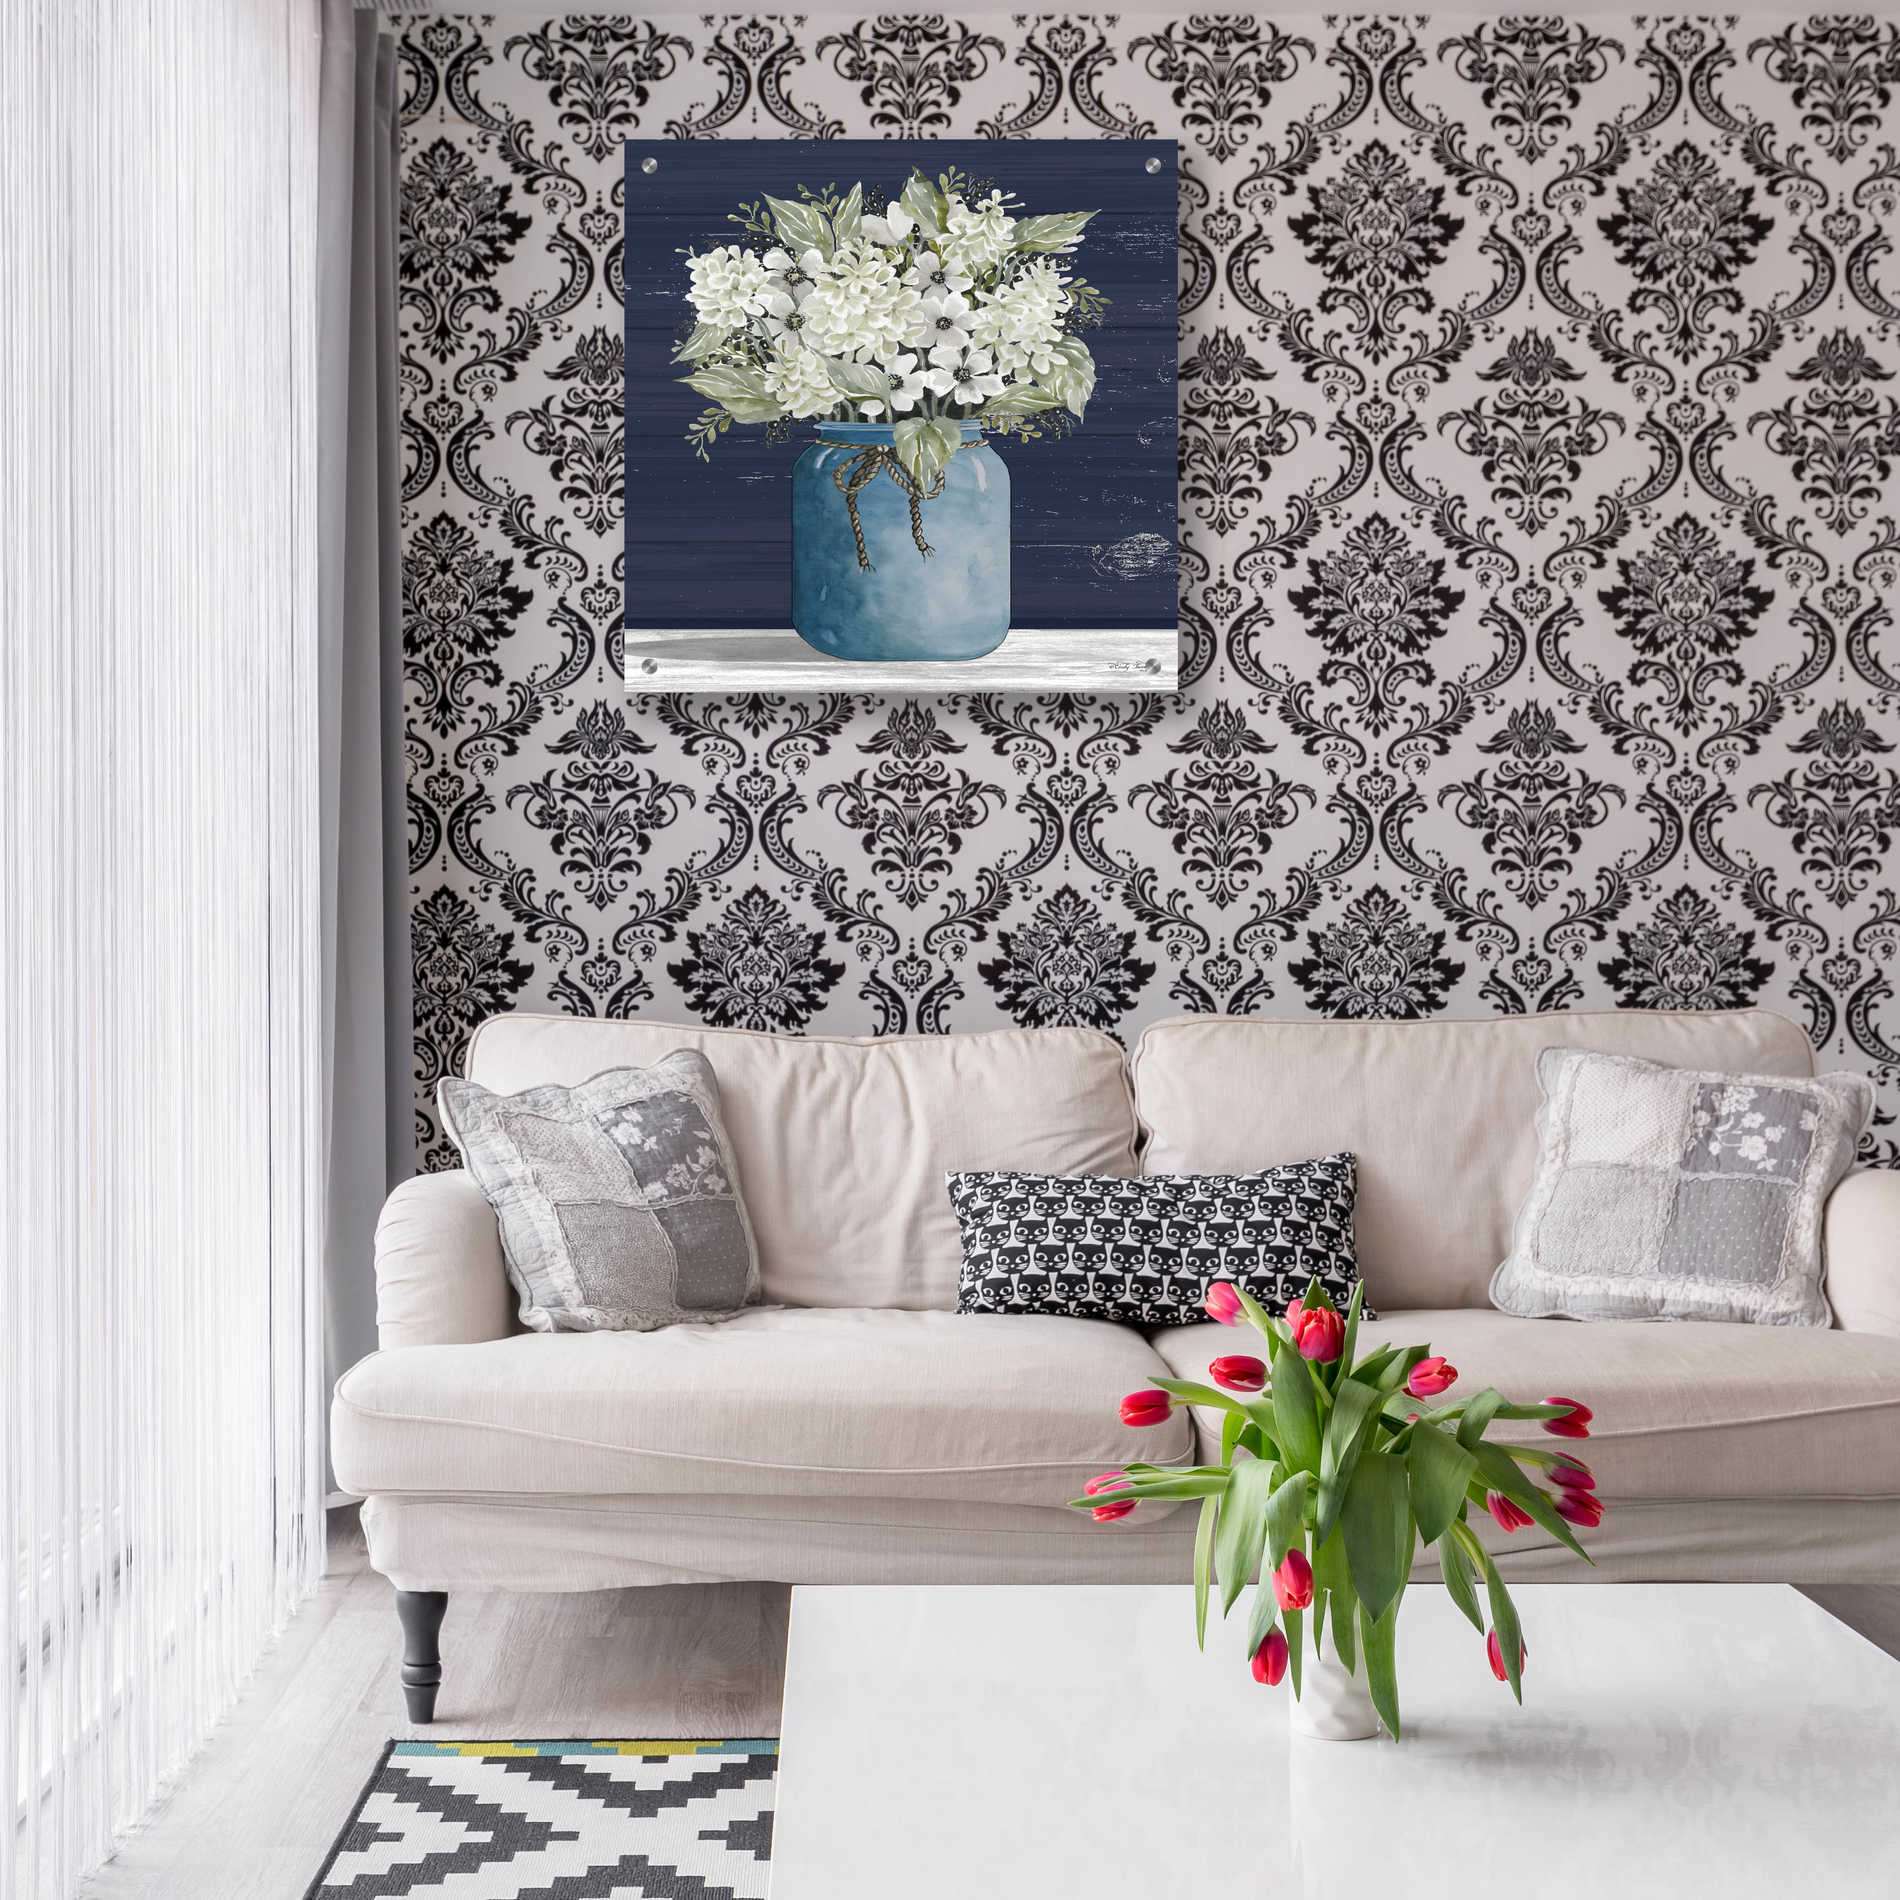 Epic Art 'White Flowers I' by Cindy Jacobs, Acrylic Glass Wall Art,24x24